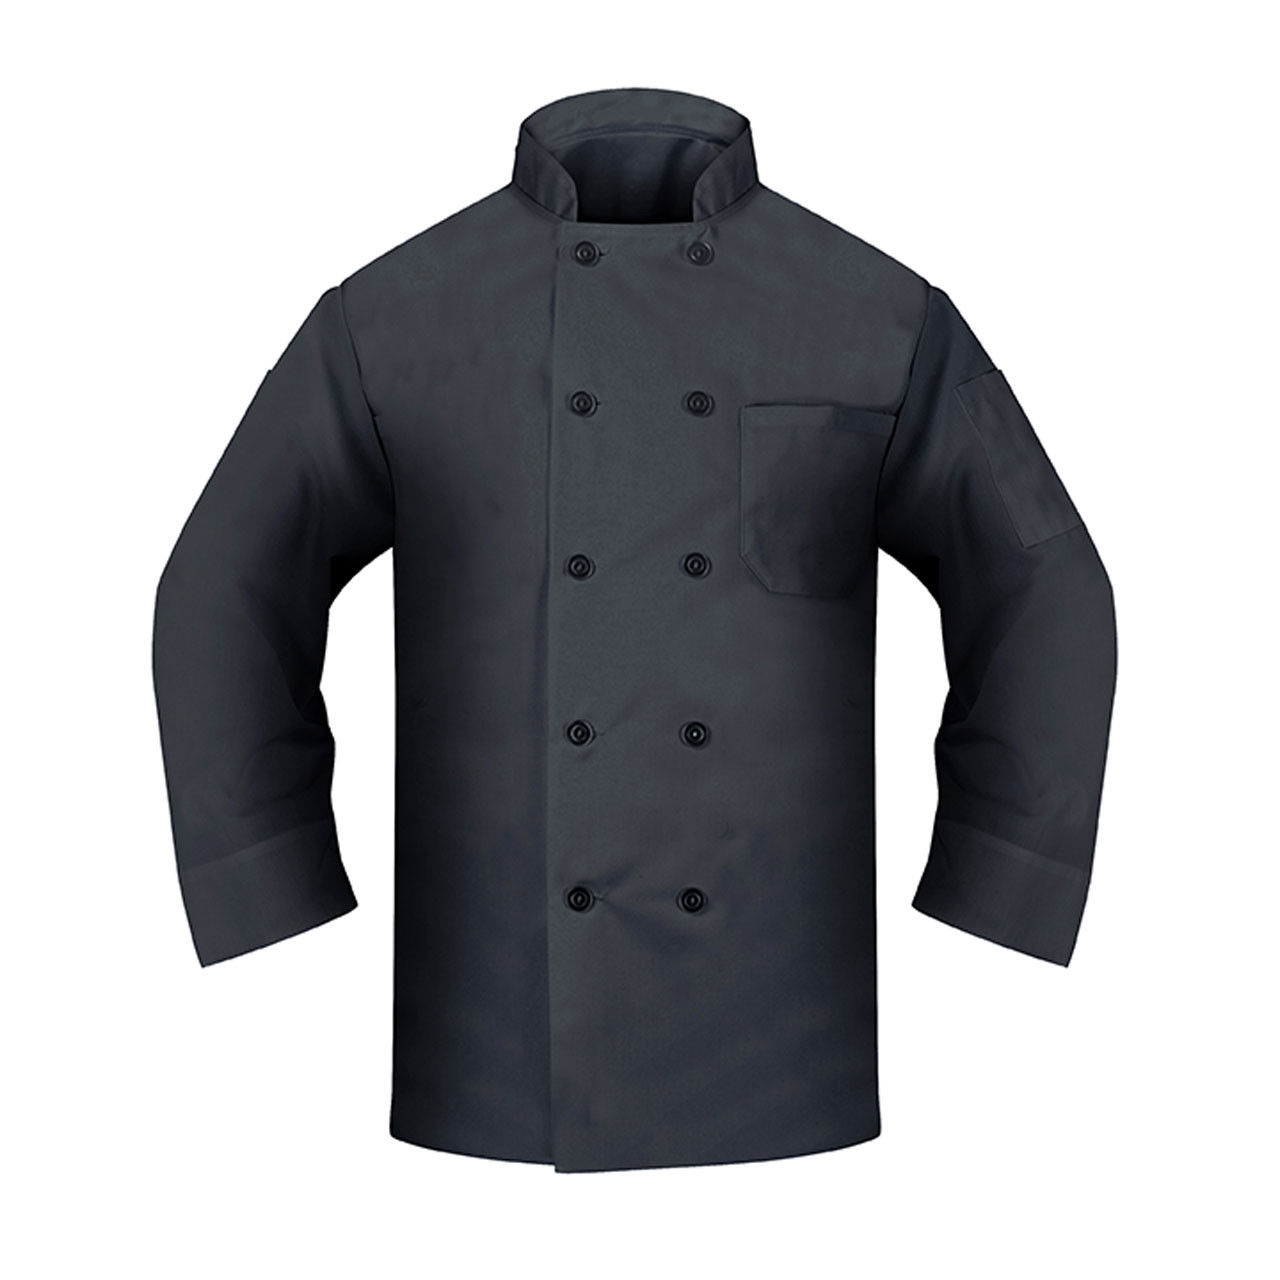 Do the black chef coats have colored buttons?